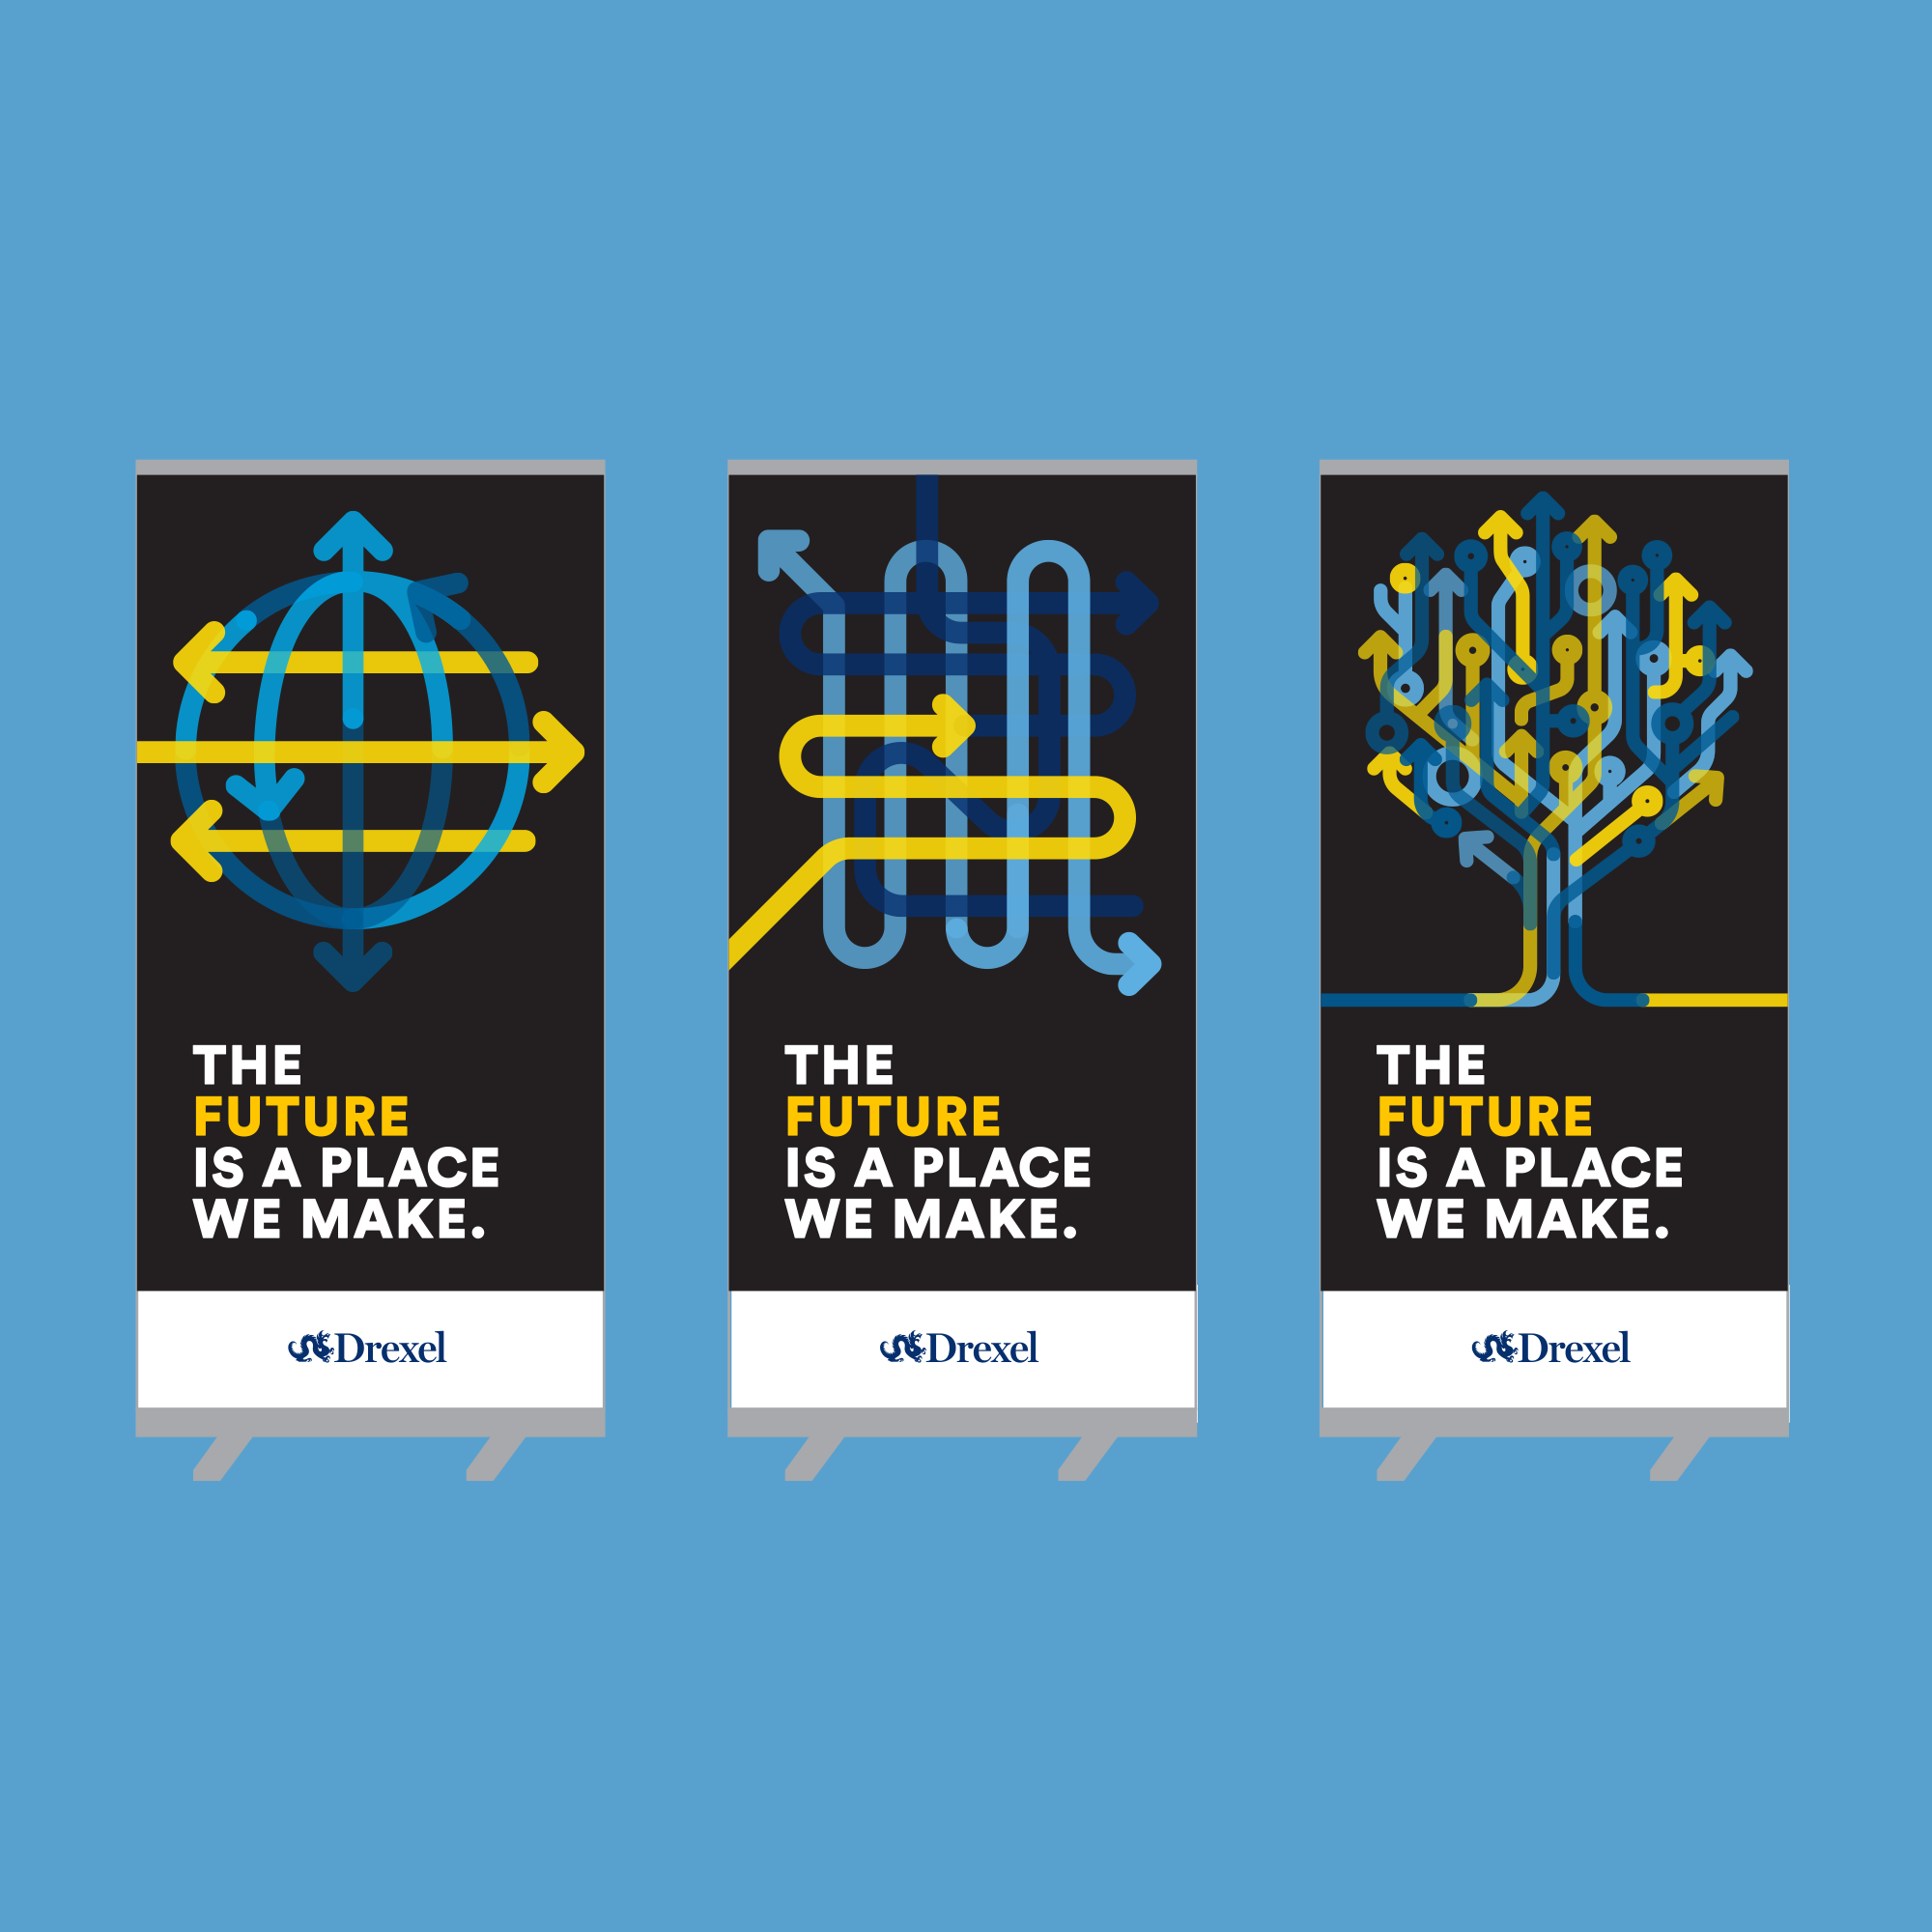 New brand campaign for Drexel University, pop up banners